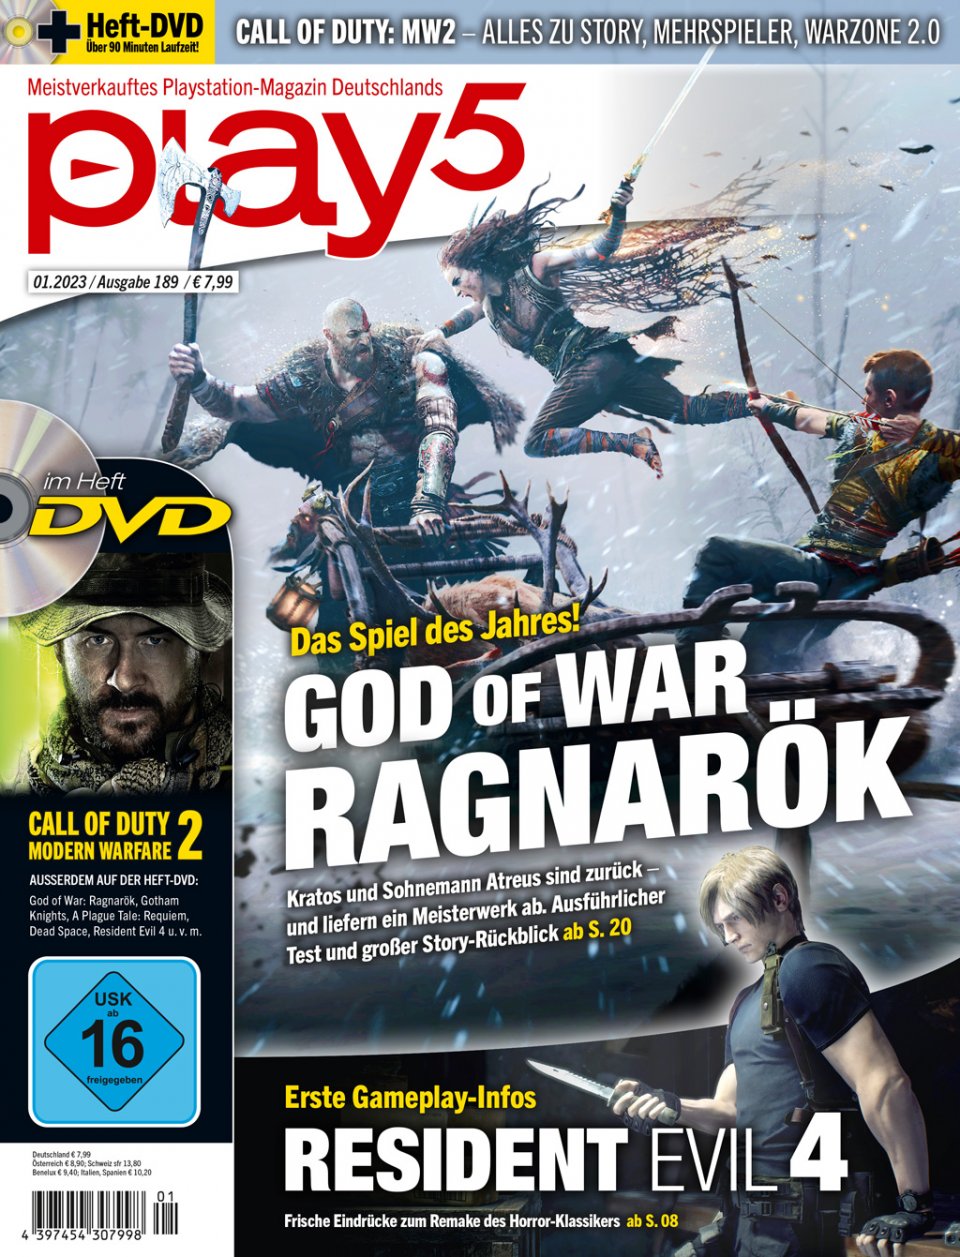 play5 01/23 with title story for God of War: Ragnarök, preview for Resident Evil 4, test for Call of Duty: Modern Warfare 2 and much more (1)